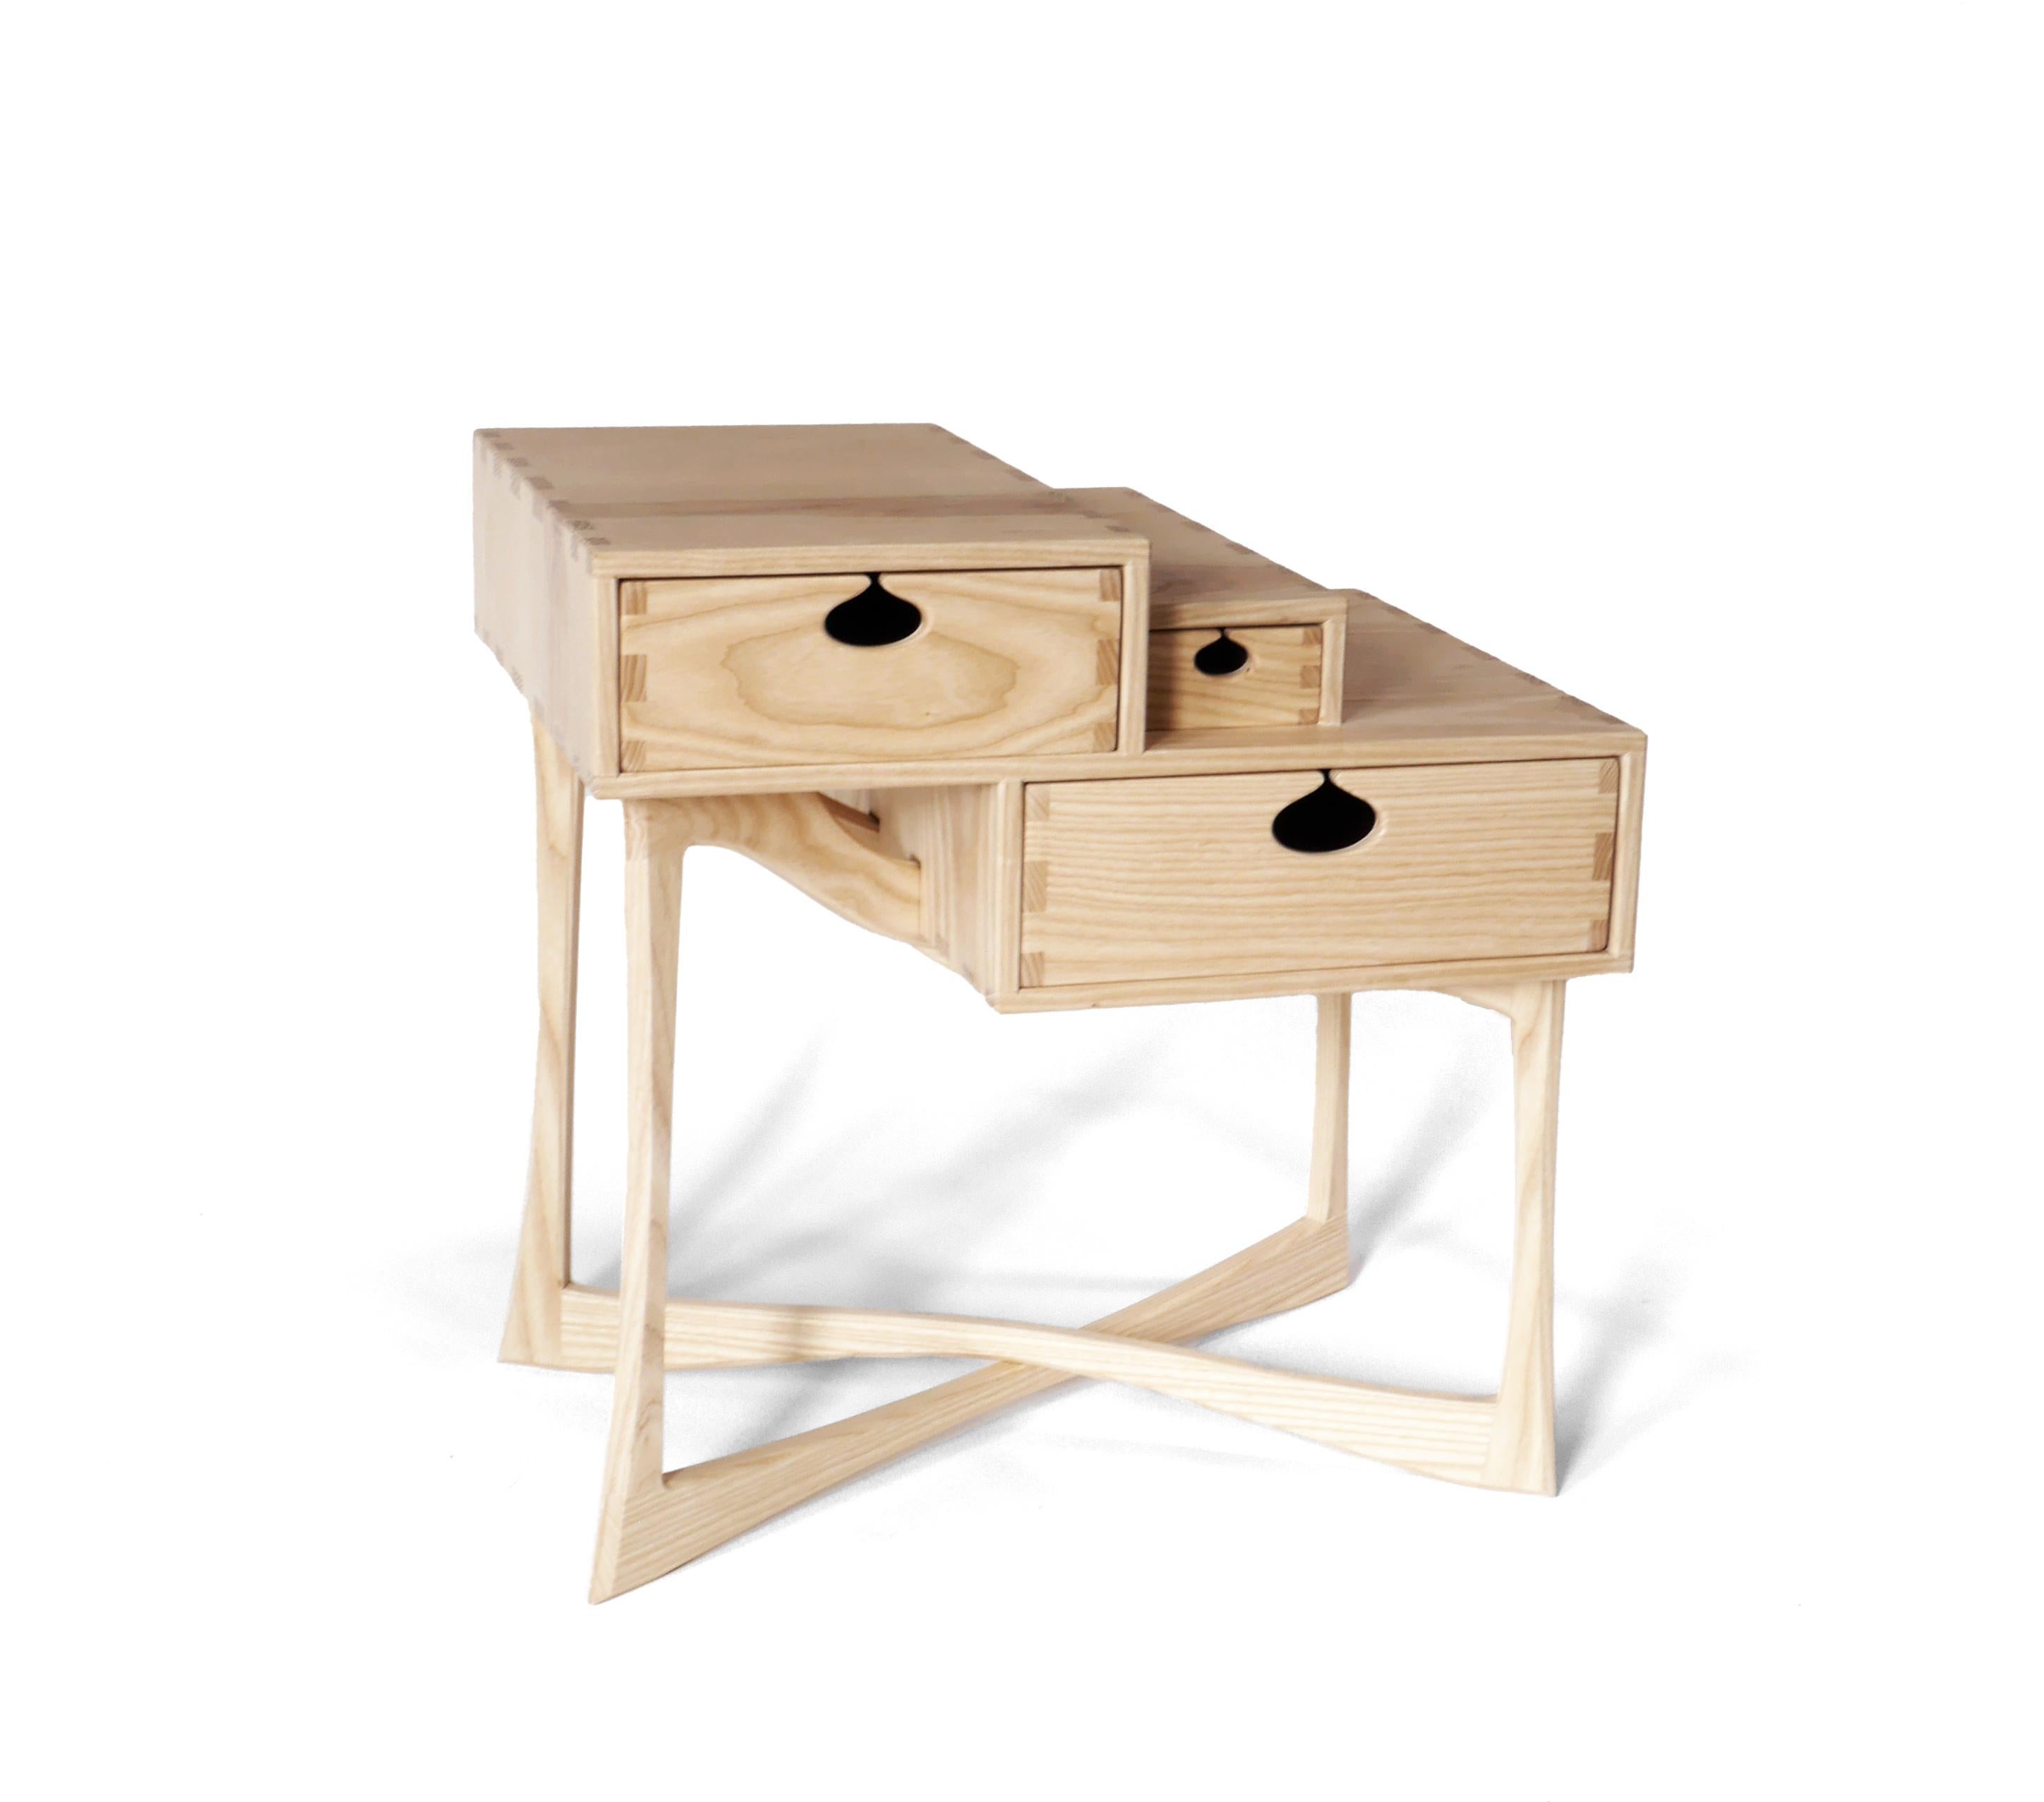 We have one of these in stock, available for immediate shipment.

The charismatic Coriolis Side Table is made out of solid white ash hardwood and has three drawers mounted on wooden runners in traditional drawer boxes. It’s built with exposed